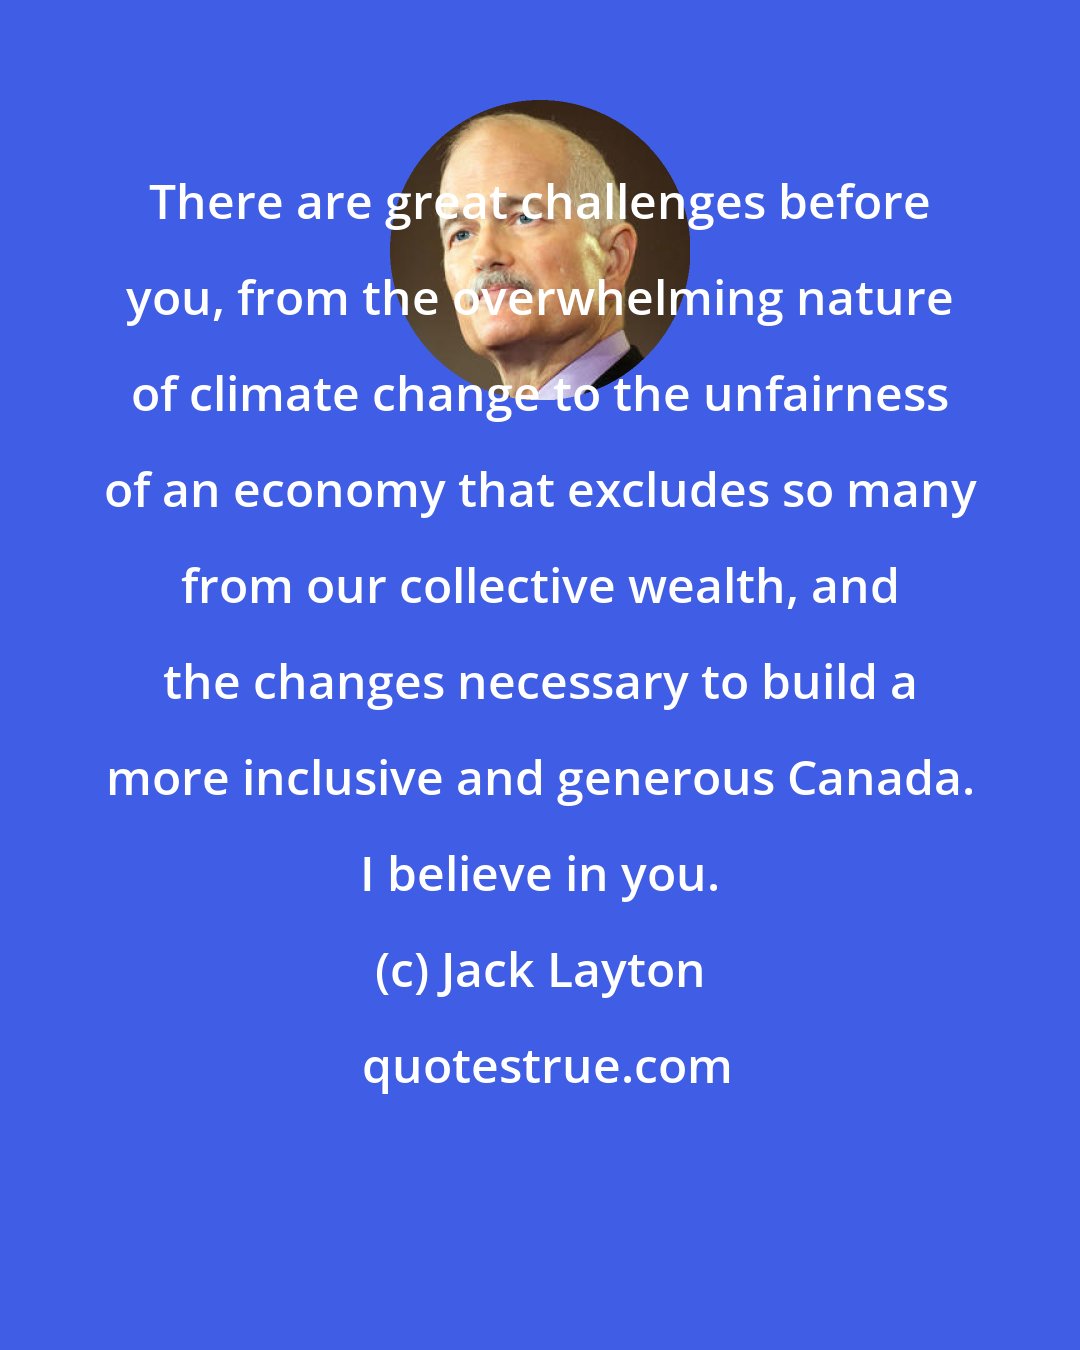 Jack Layton: There are great challenges before you, from the overwhelming nature of climate change to the unfairness of an economy that excludes so many from our collective wealth, and the changes necessary to build a more inclusive and generous Canada. I believe in you.